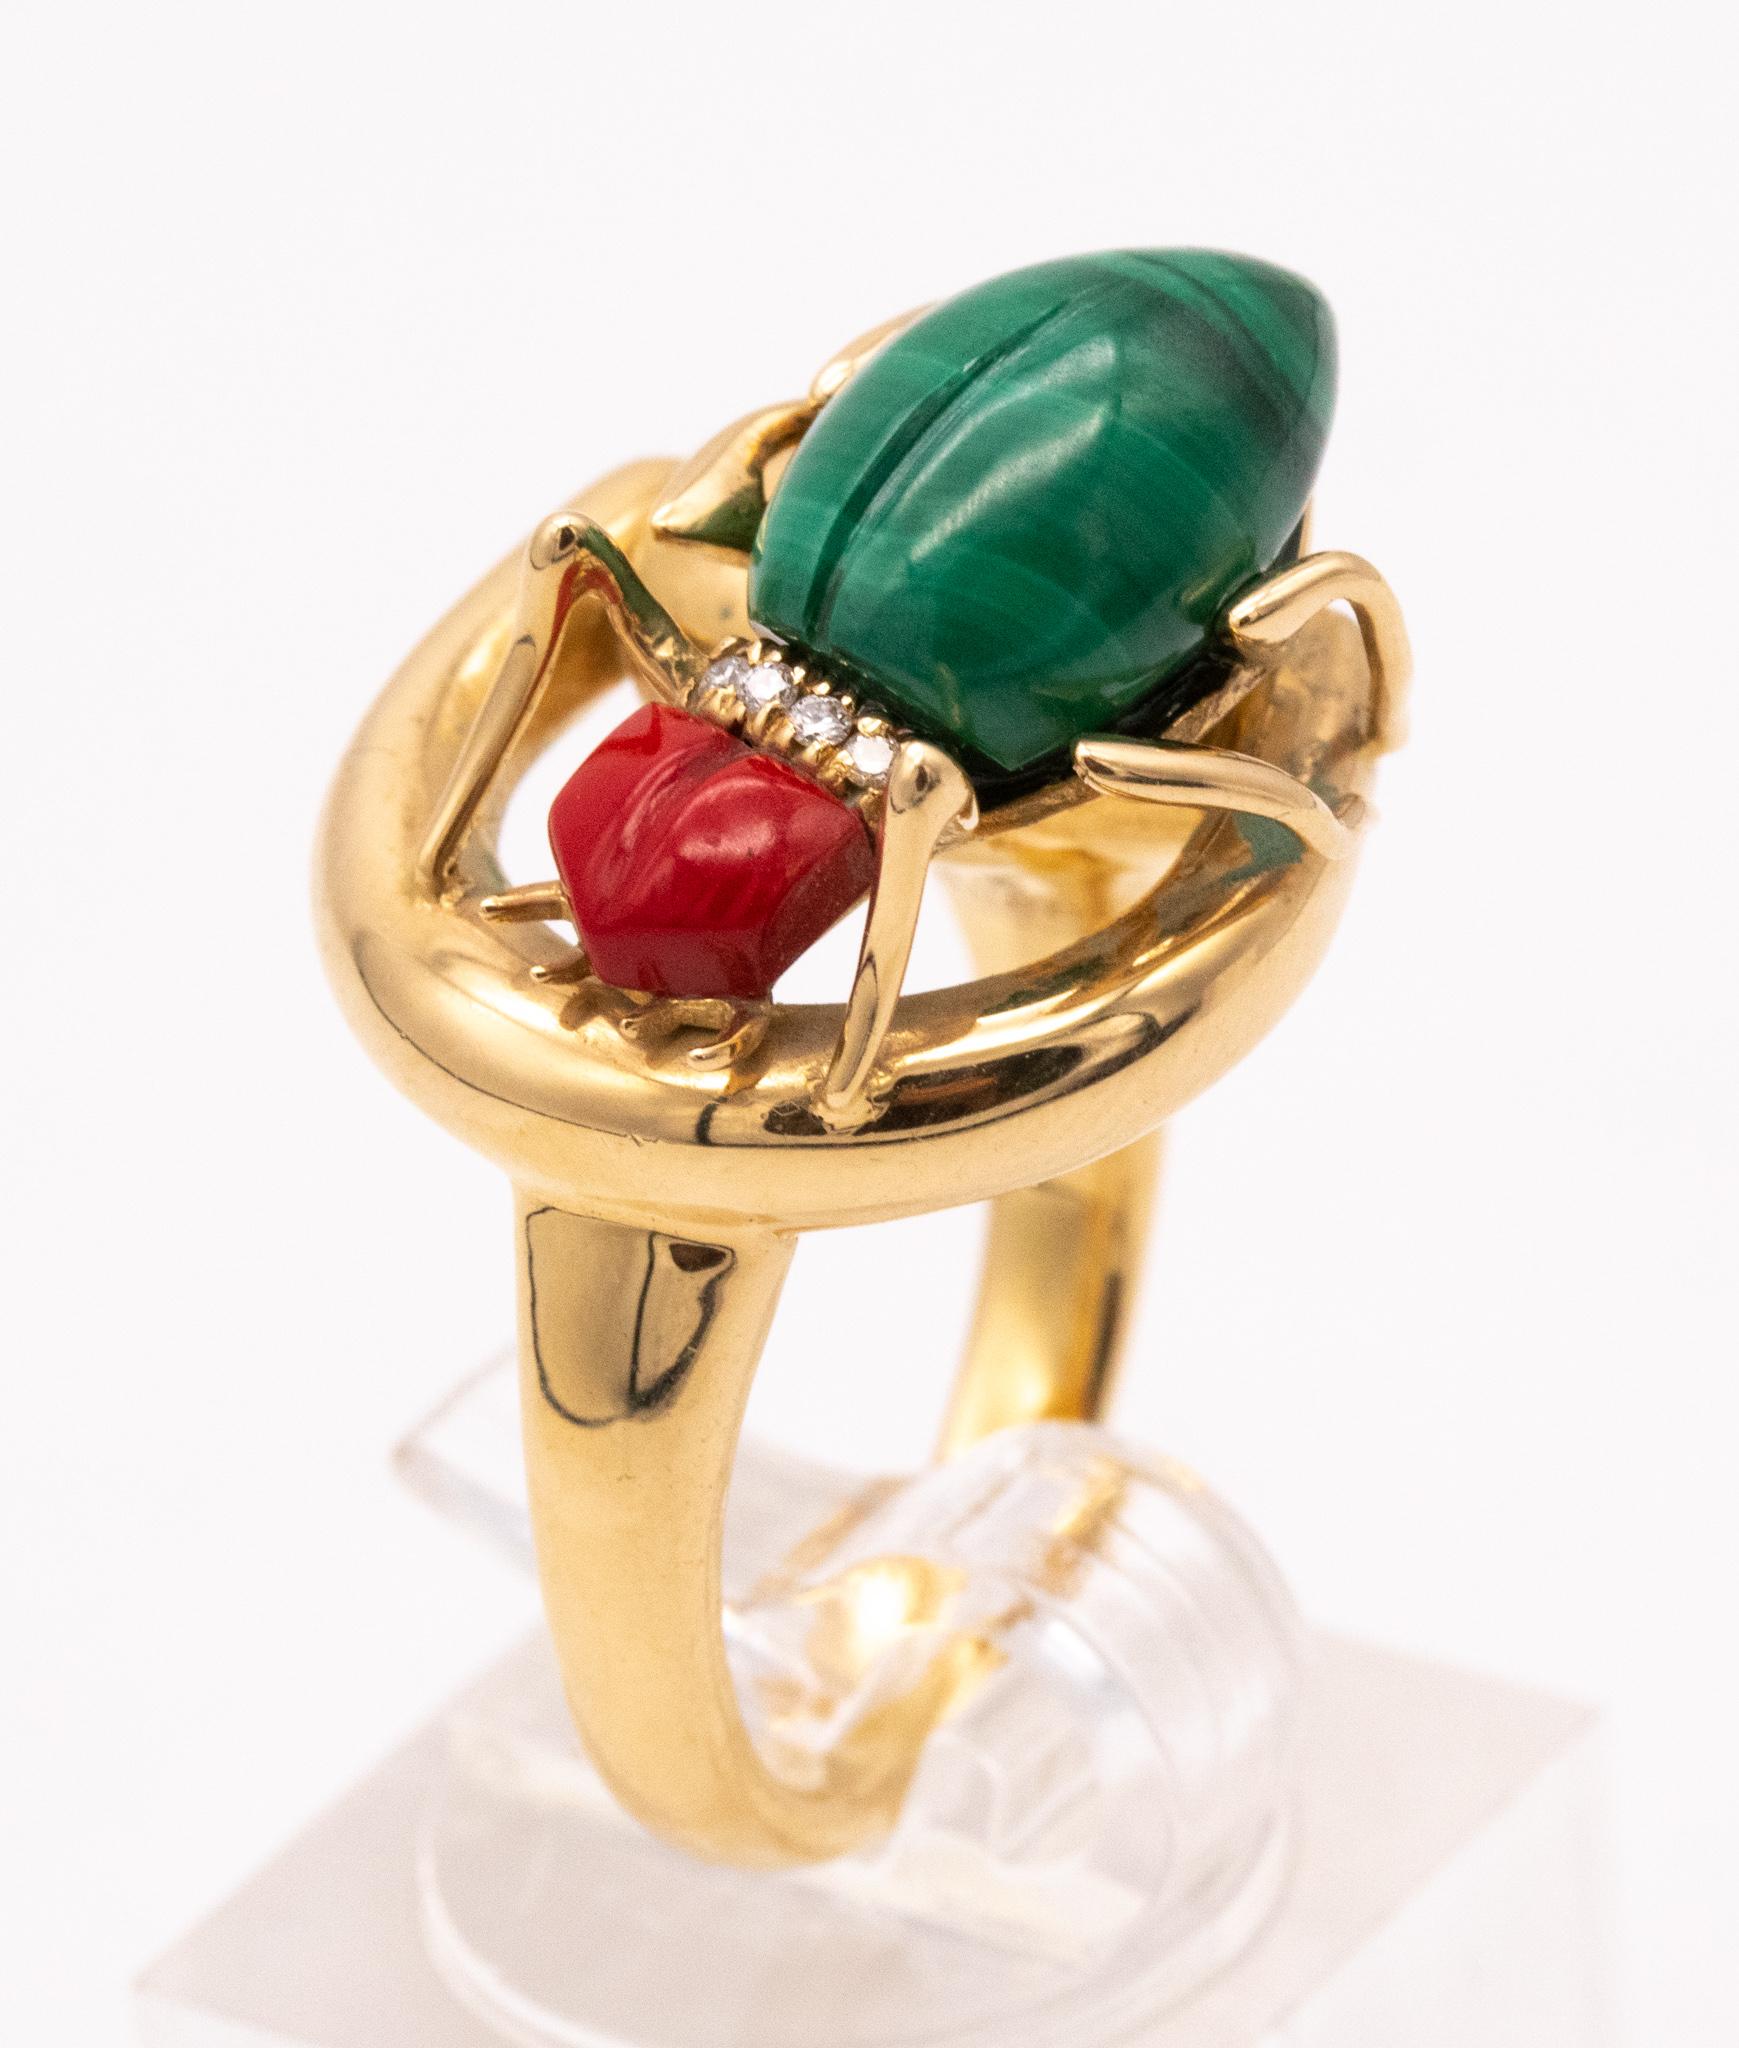 Retro Gucci Milano 18Kt Yellow Gold Beetle Ring with Diamonds, Coral and Malachite